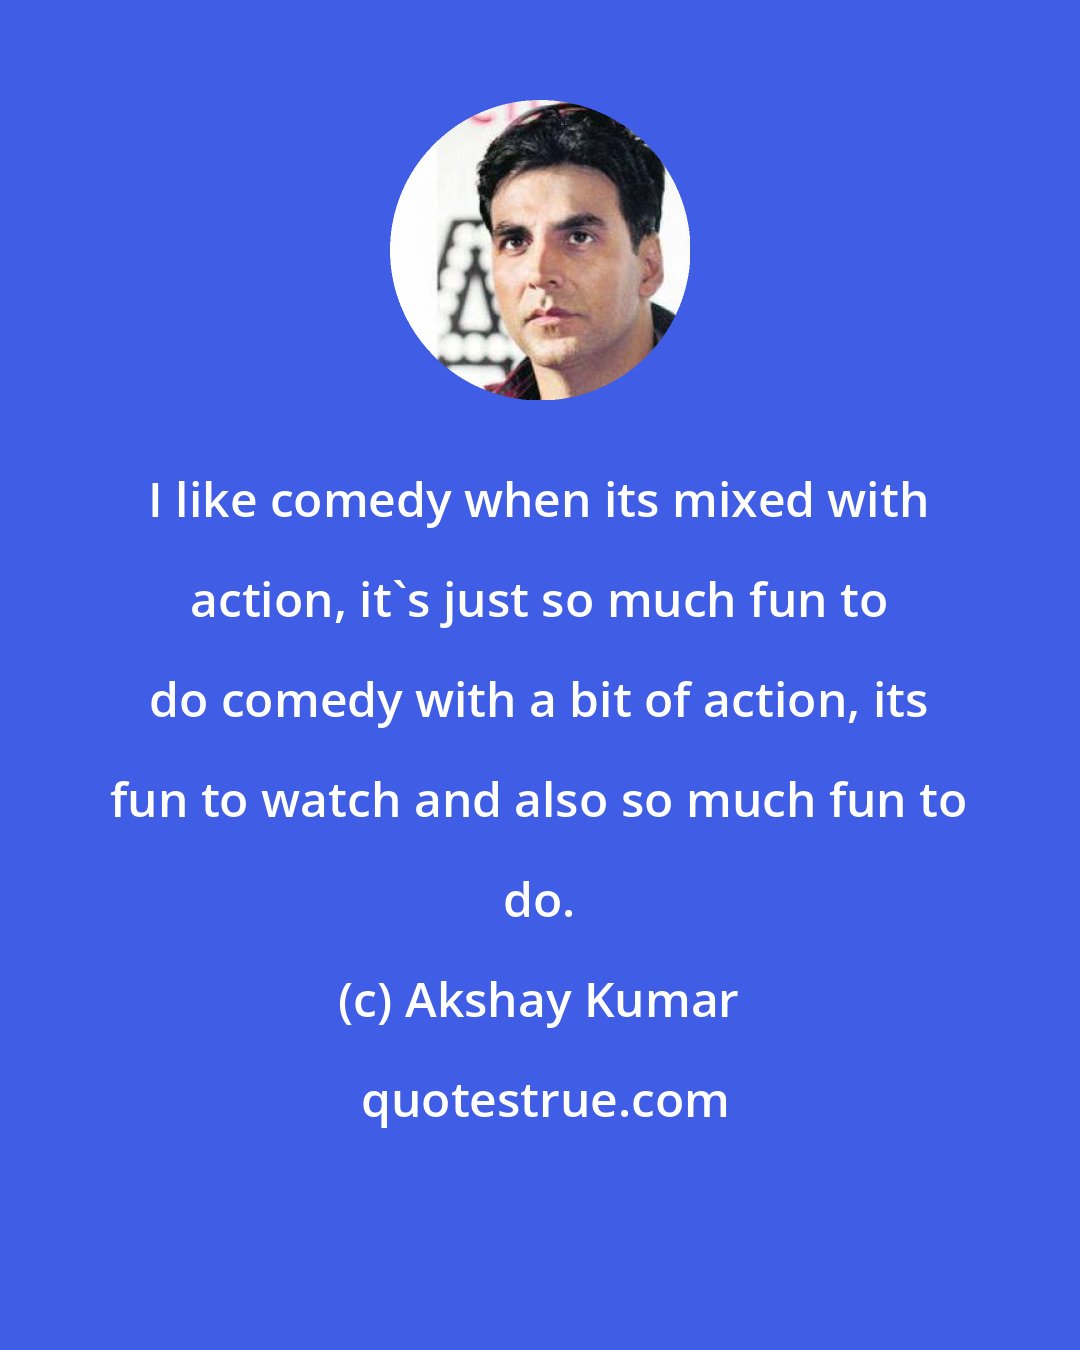 Akshay Kumar: I like comedy when its mixed with action, it's just so much fun to do comedy with a bit of action, its fun to watch and also so much fun to do.